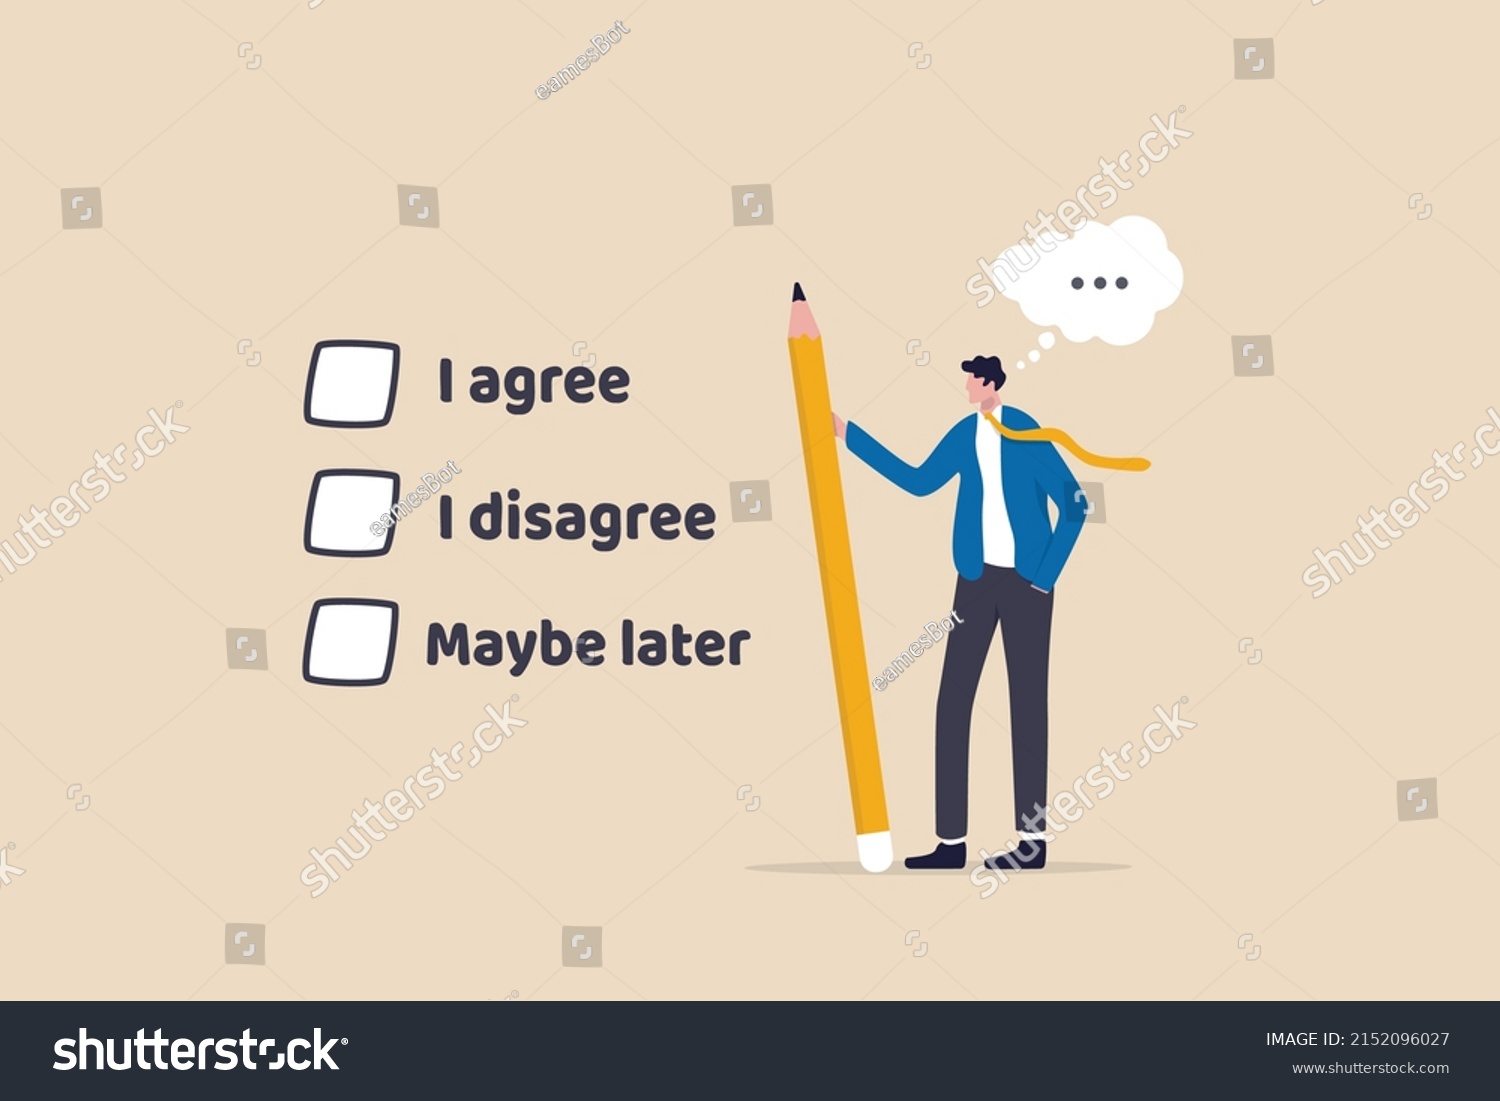 SVG of Consent document to choose, agree or disagree, accept or approve permission, yes or no answer, decide later, business agreement concept, businessman holding pencil decide to agree consent question. svg